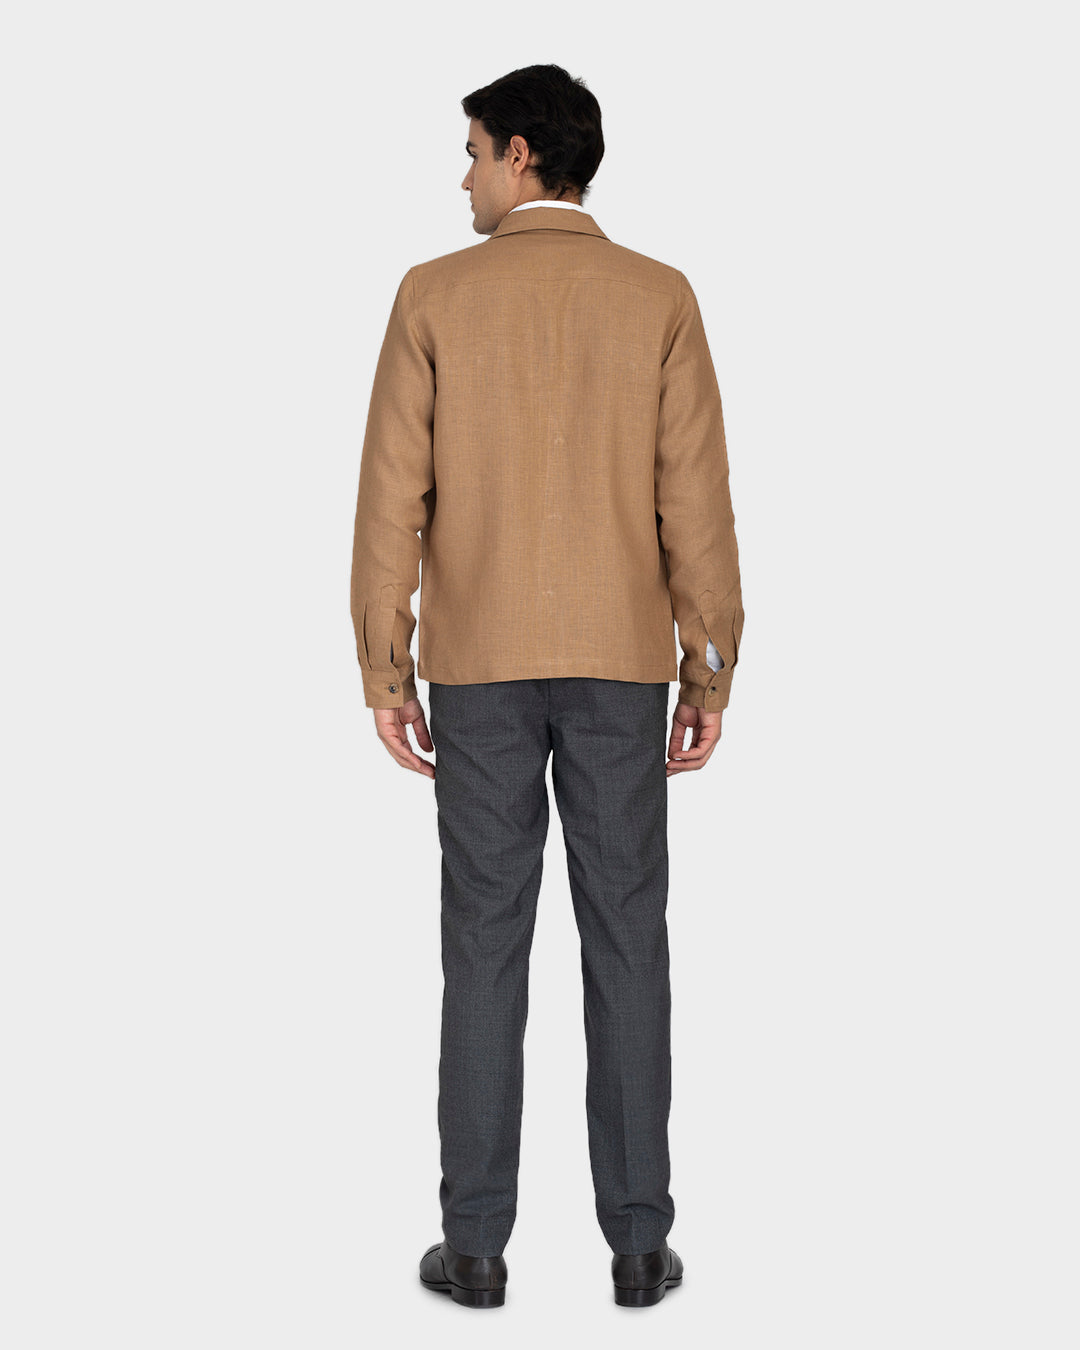 Back of model wearing the linen shirt jacket for men by Luxire in golden brown